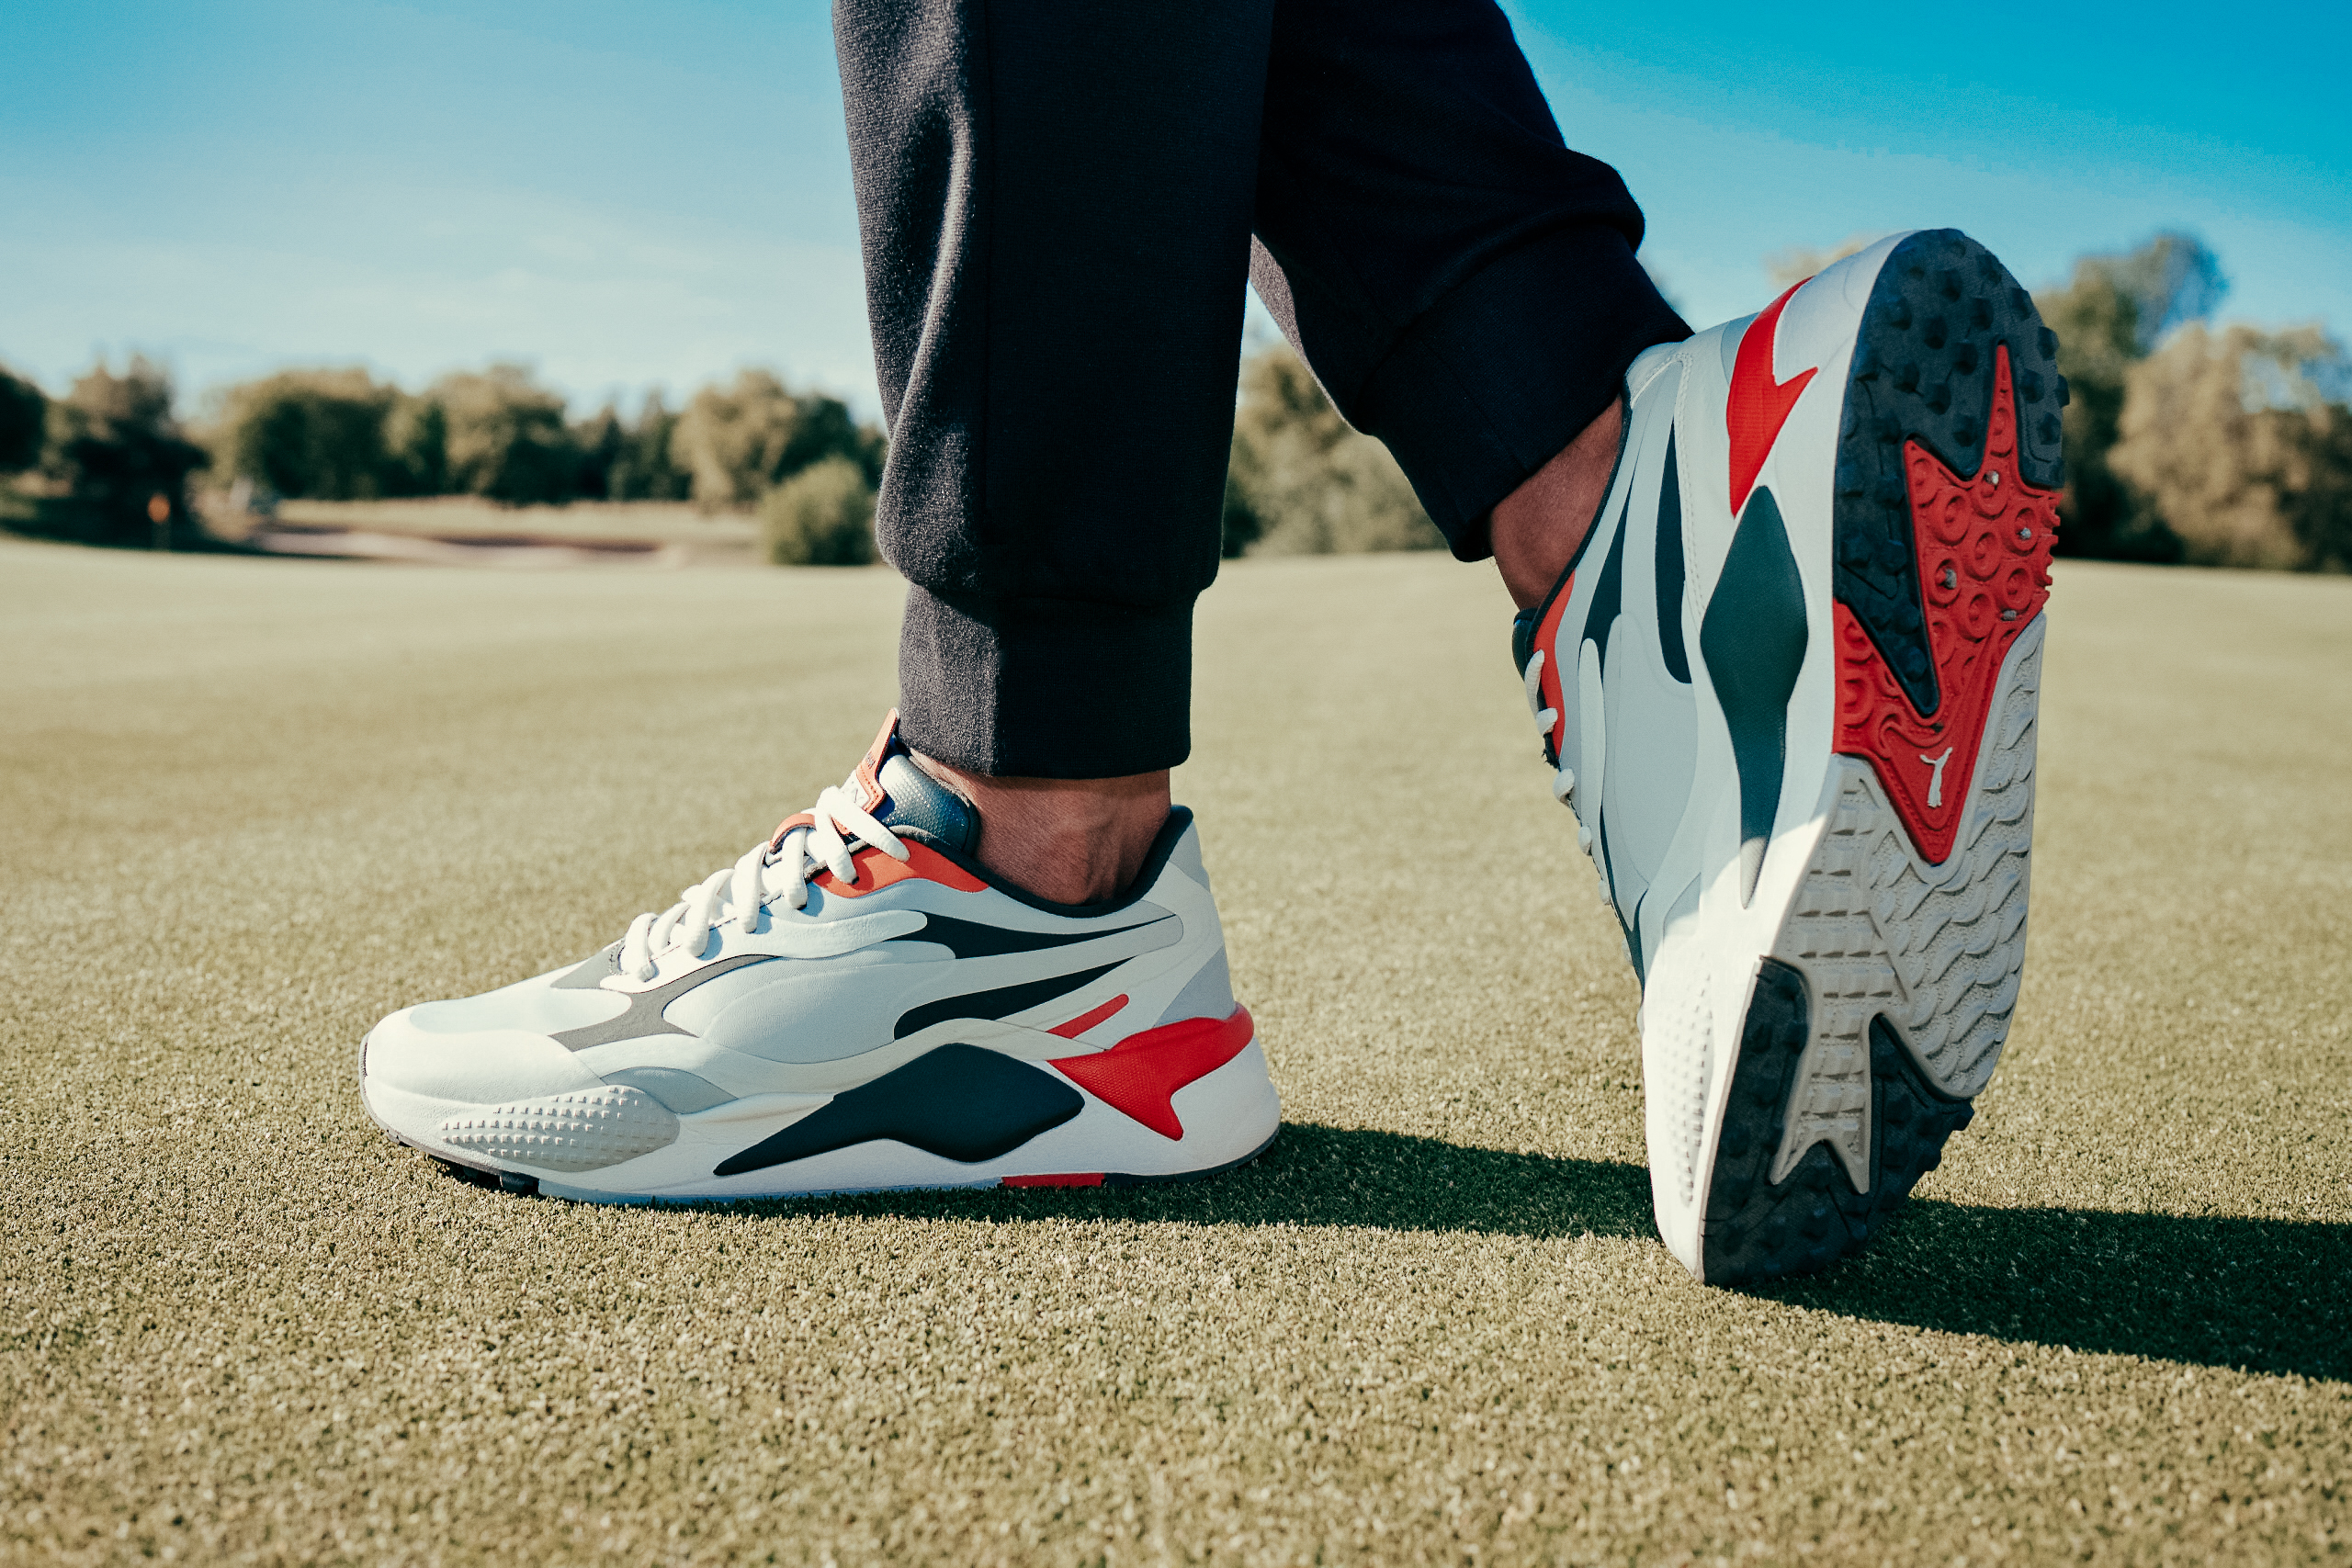 Puma's latest shoes are a bold step in the fashion-forward category | Golf Equipment: Clubs, Balls, Bags |